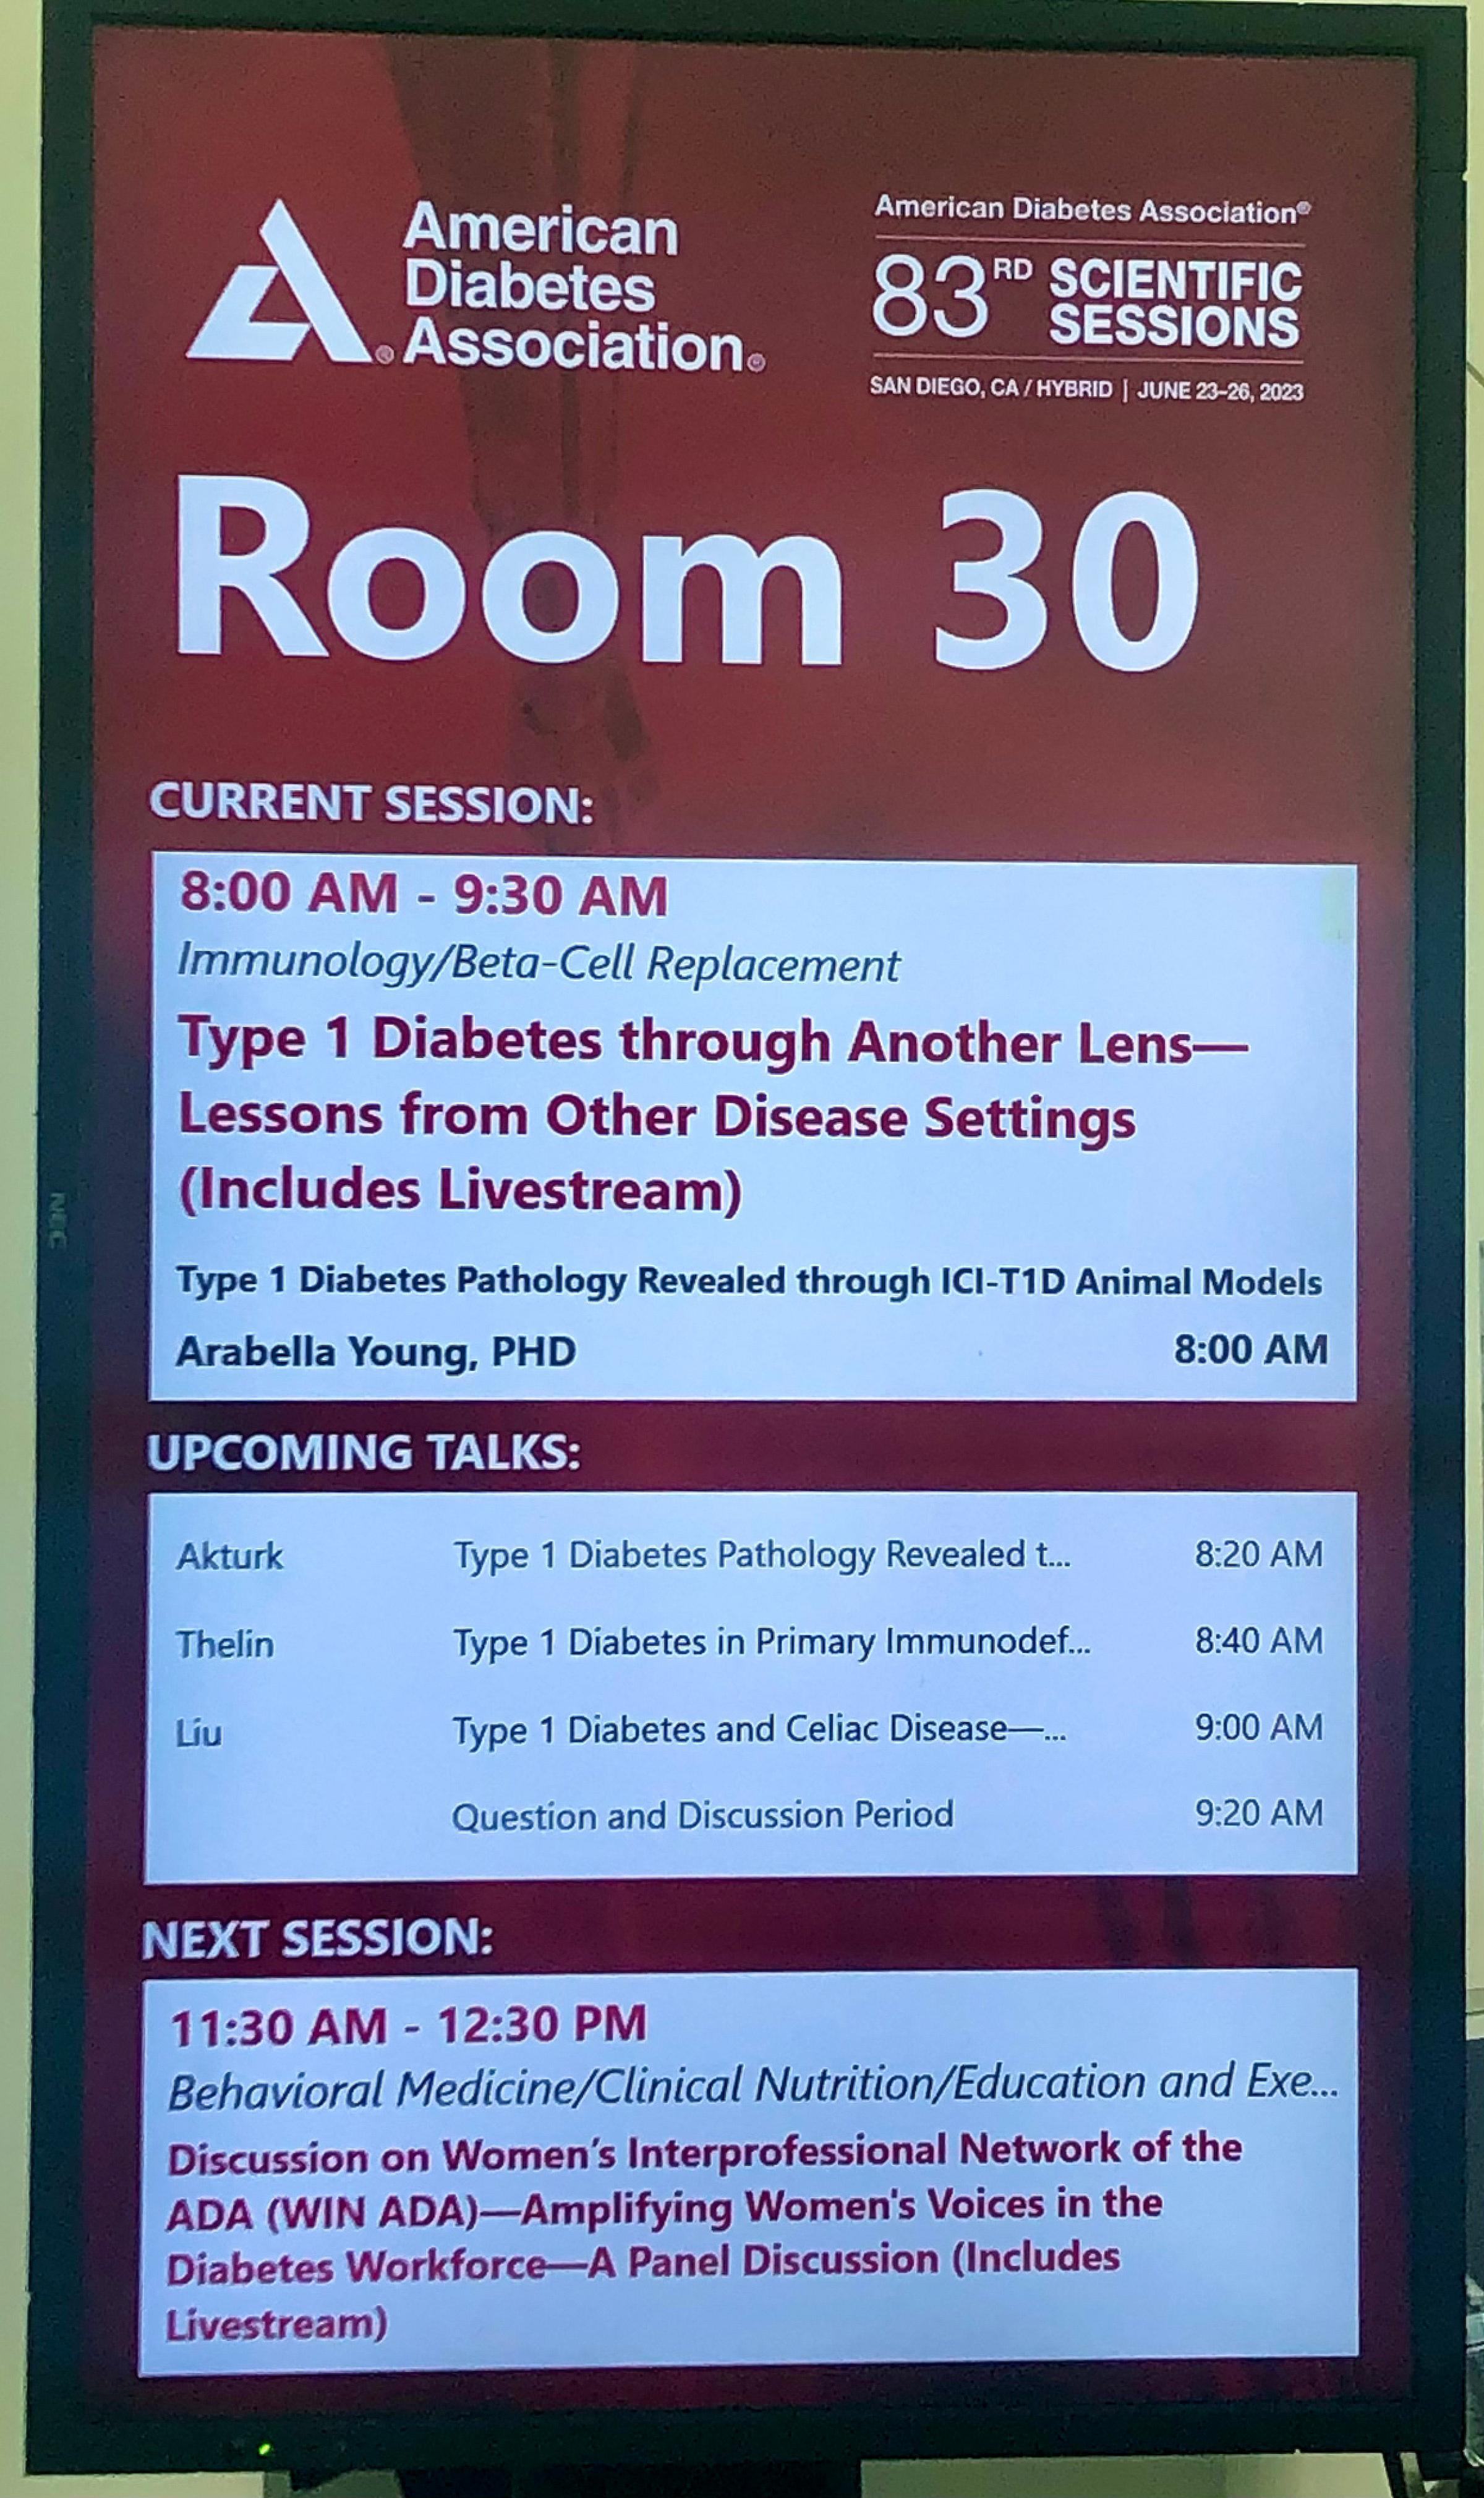 Room plaque from American Diabetes Association Annual Meeting showing upcoming presentation by Arabella Young, PhD